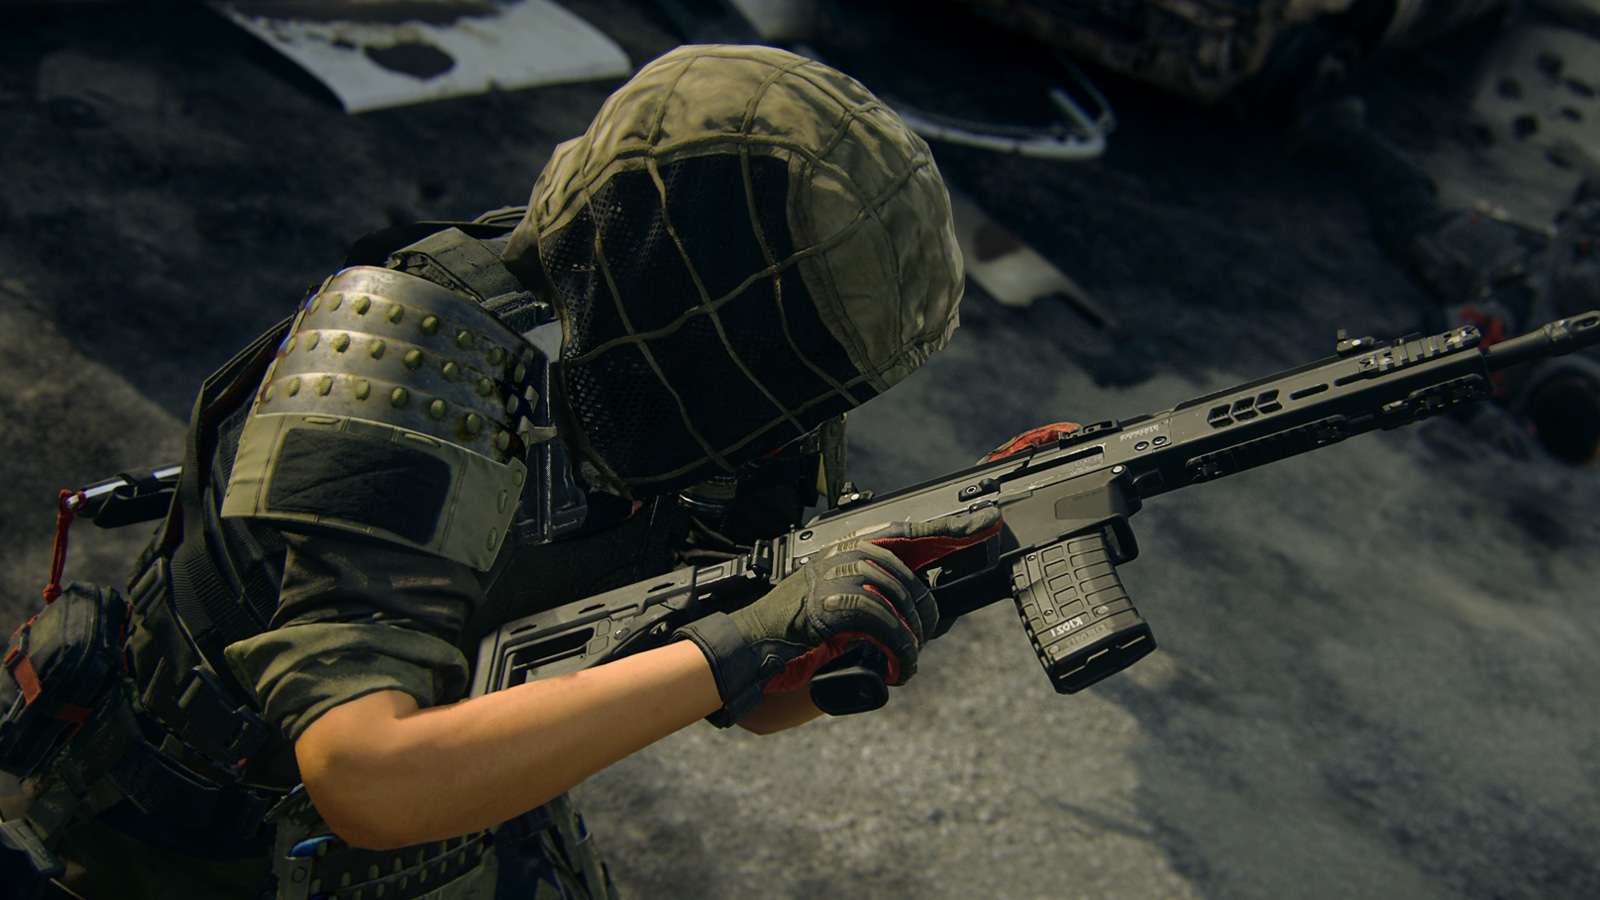 soldier running in warzone 2 whilst inspecting iso hemlock assault rifle.